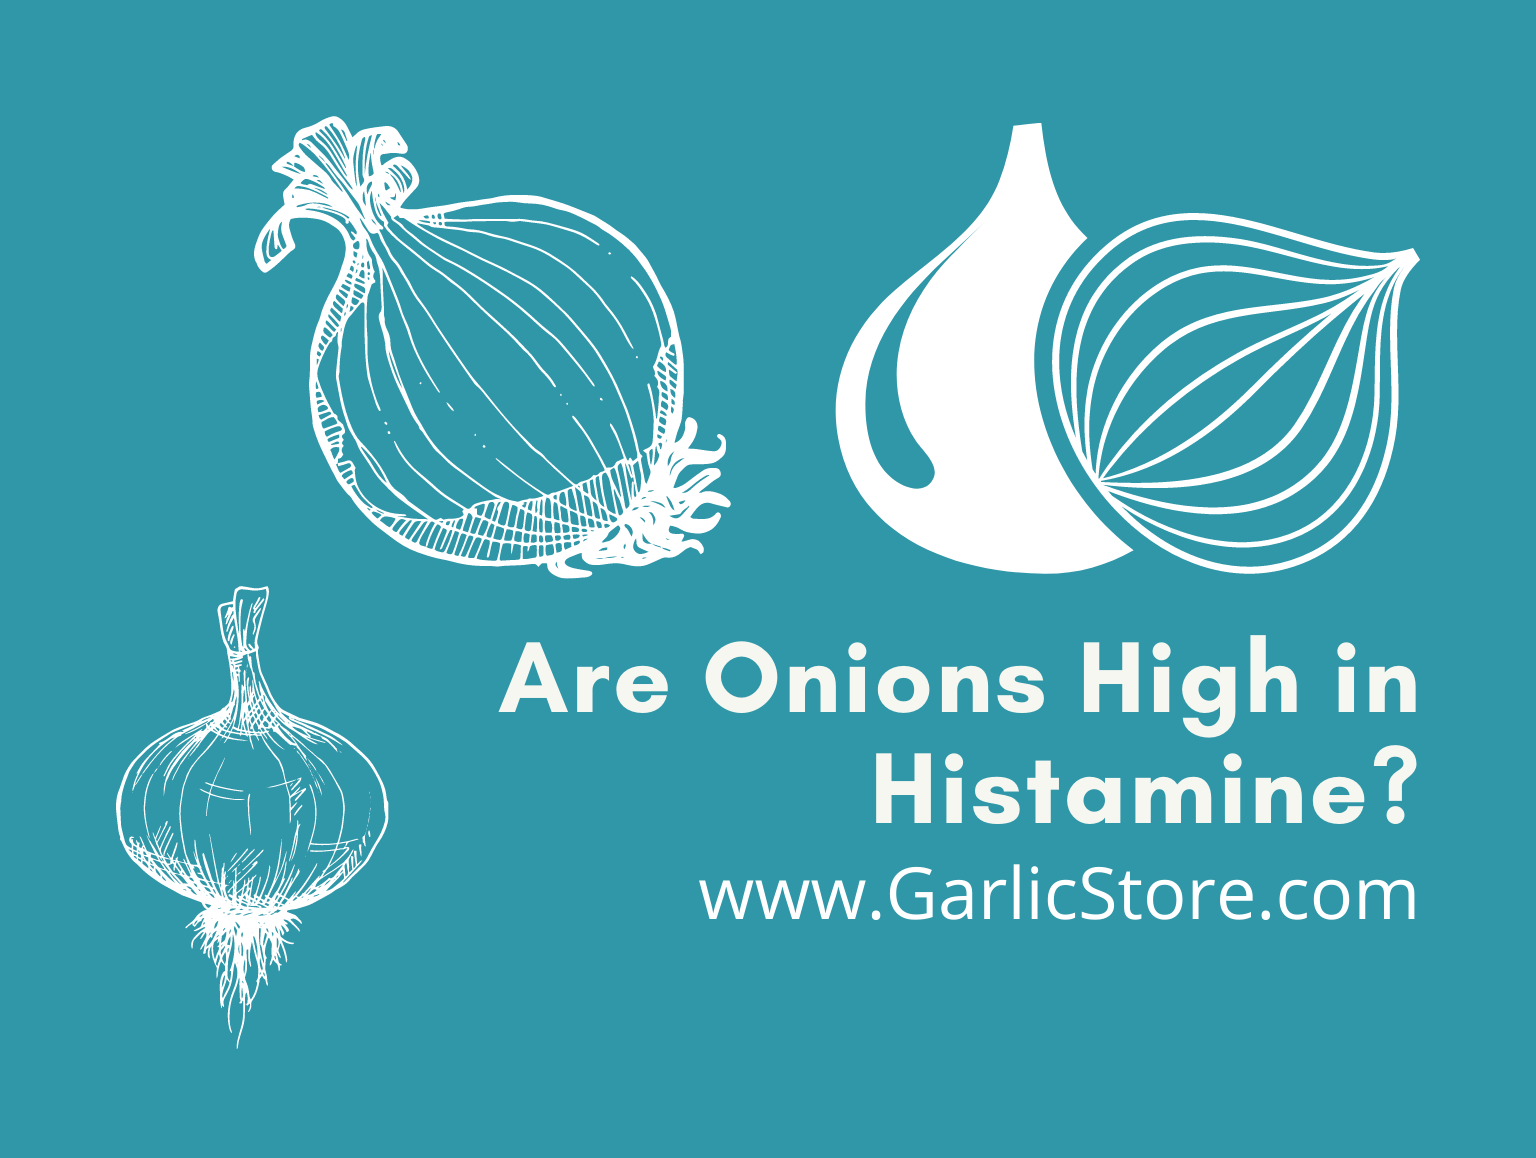 Are Onions High in Histamine